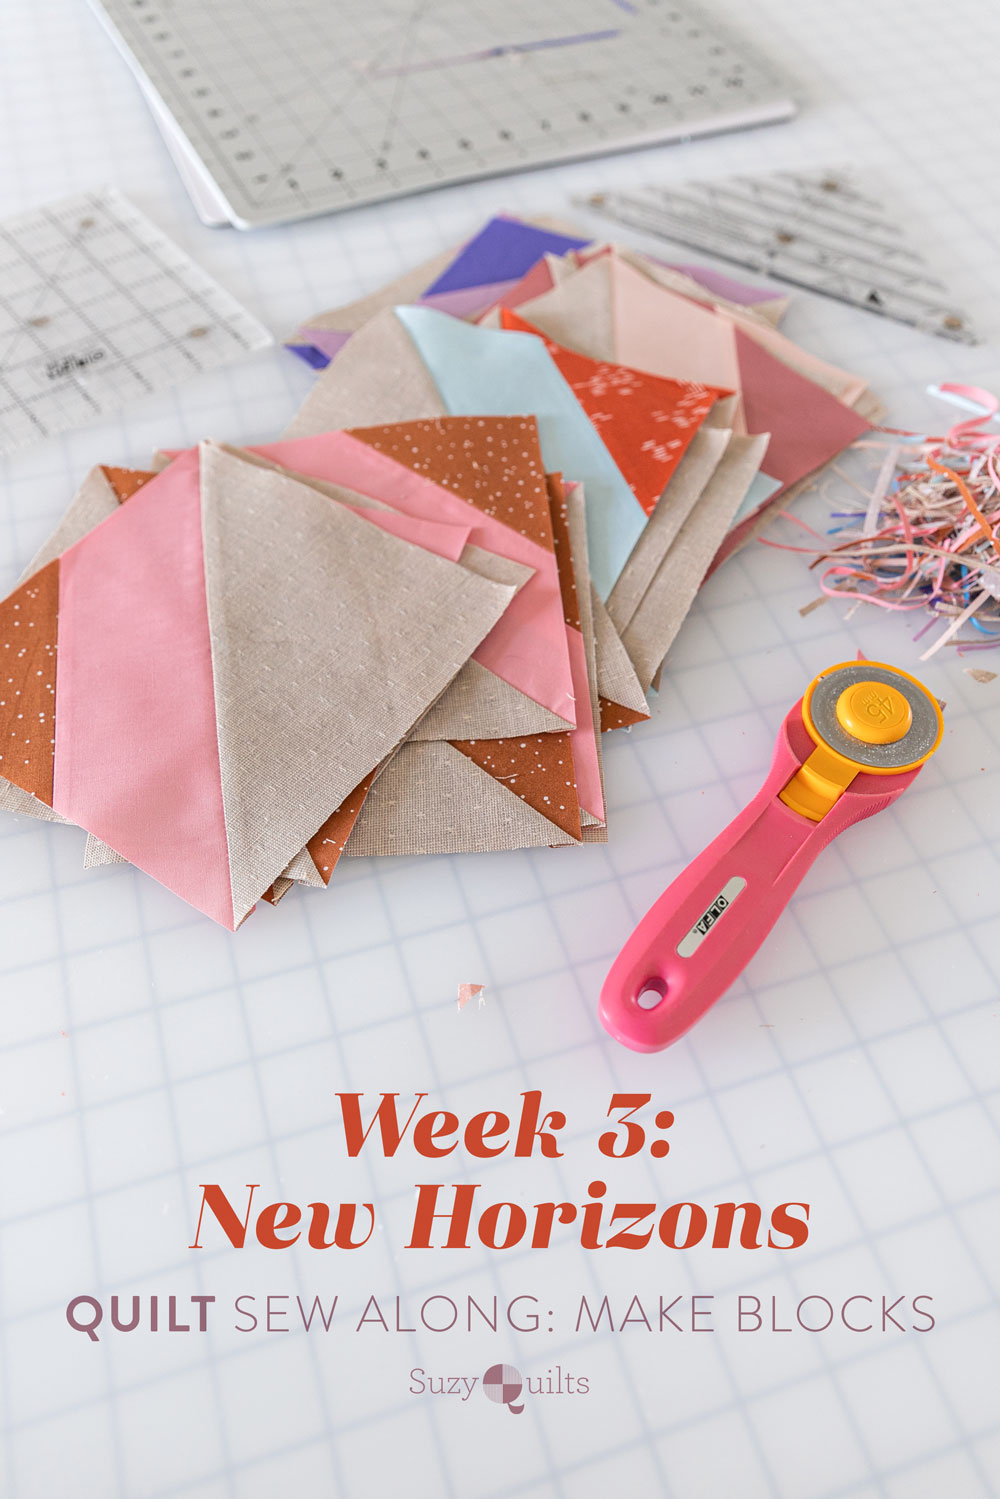 Have fun making this fat quarter friendly quilt pattern! The New Horizons quilt along includes lots of extra instruction and tips. suzyquilts.com #sewalong #quilting